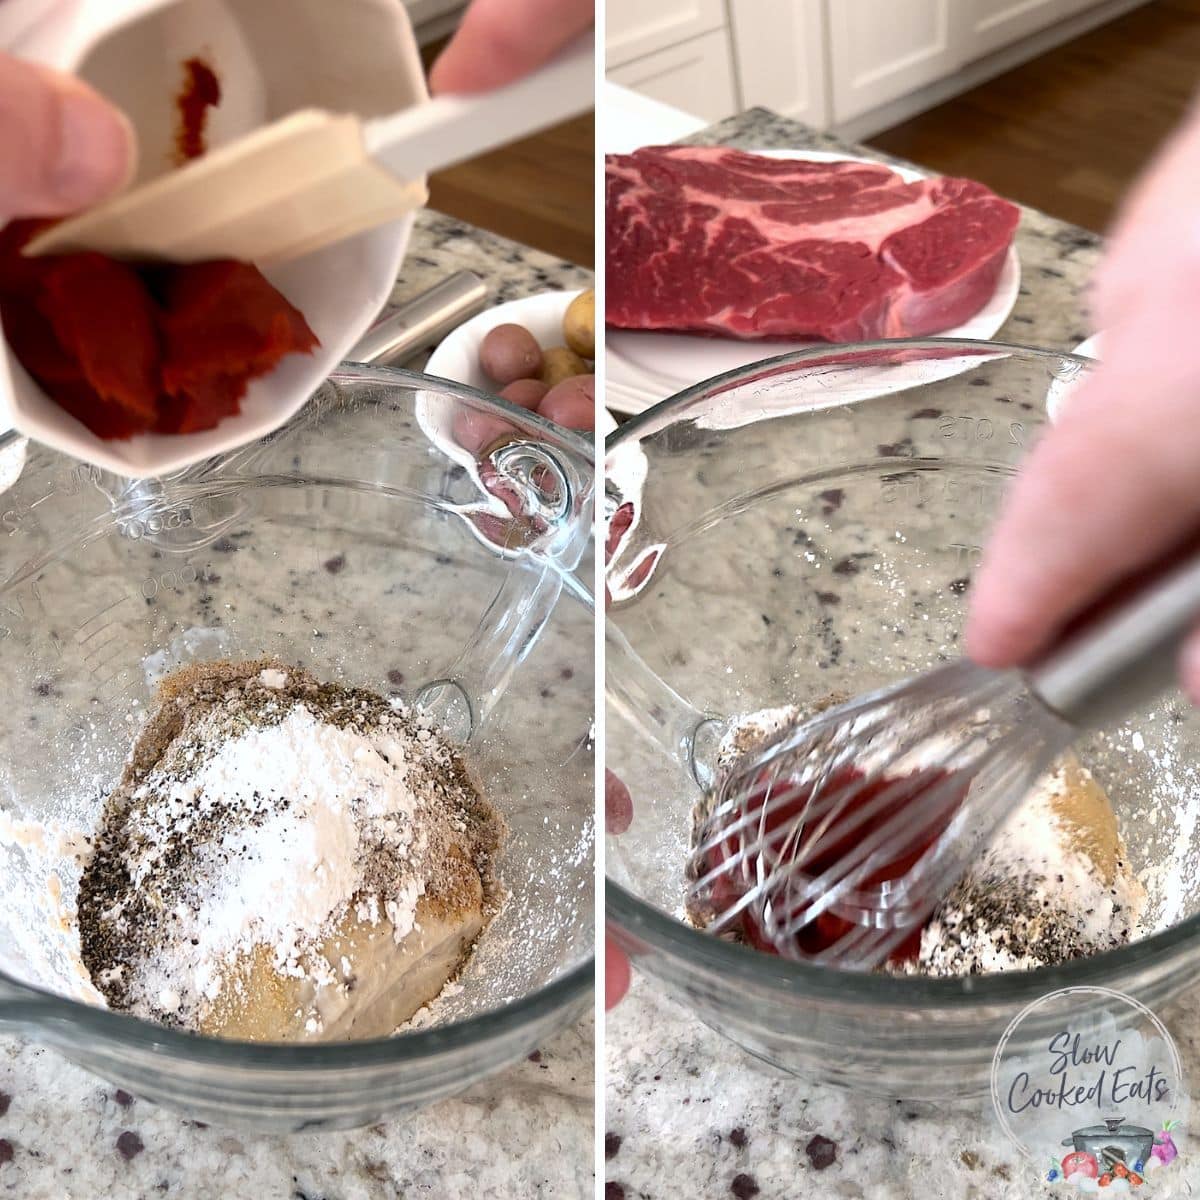 Mixing the sauce in a clear glass bowl with a whisk.